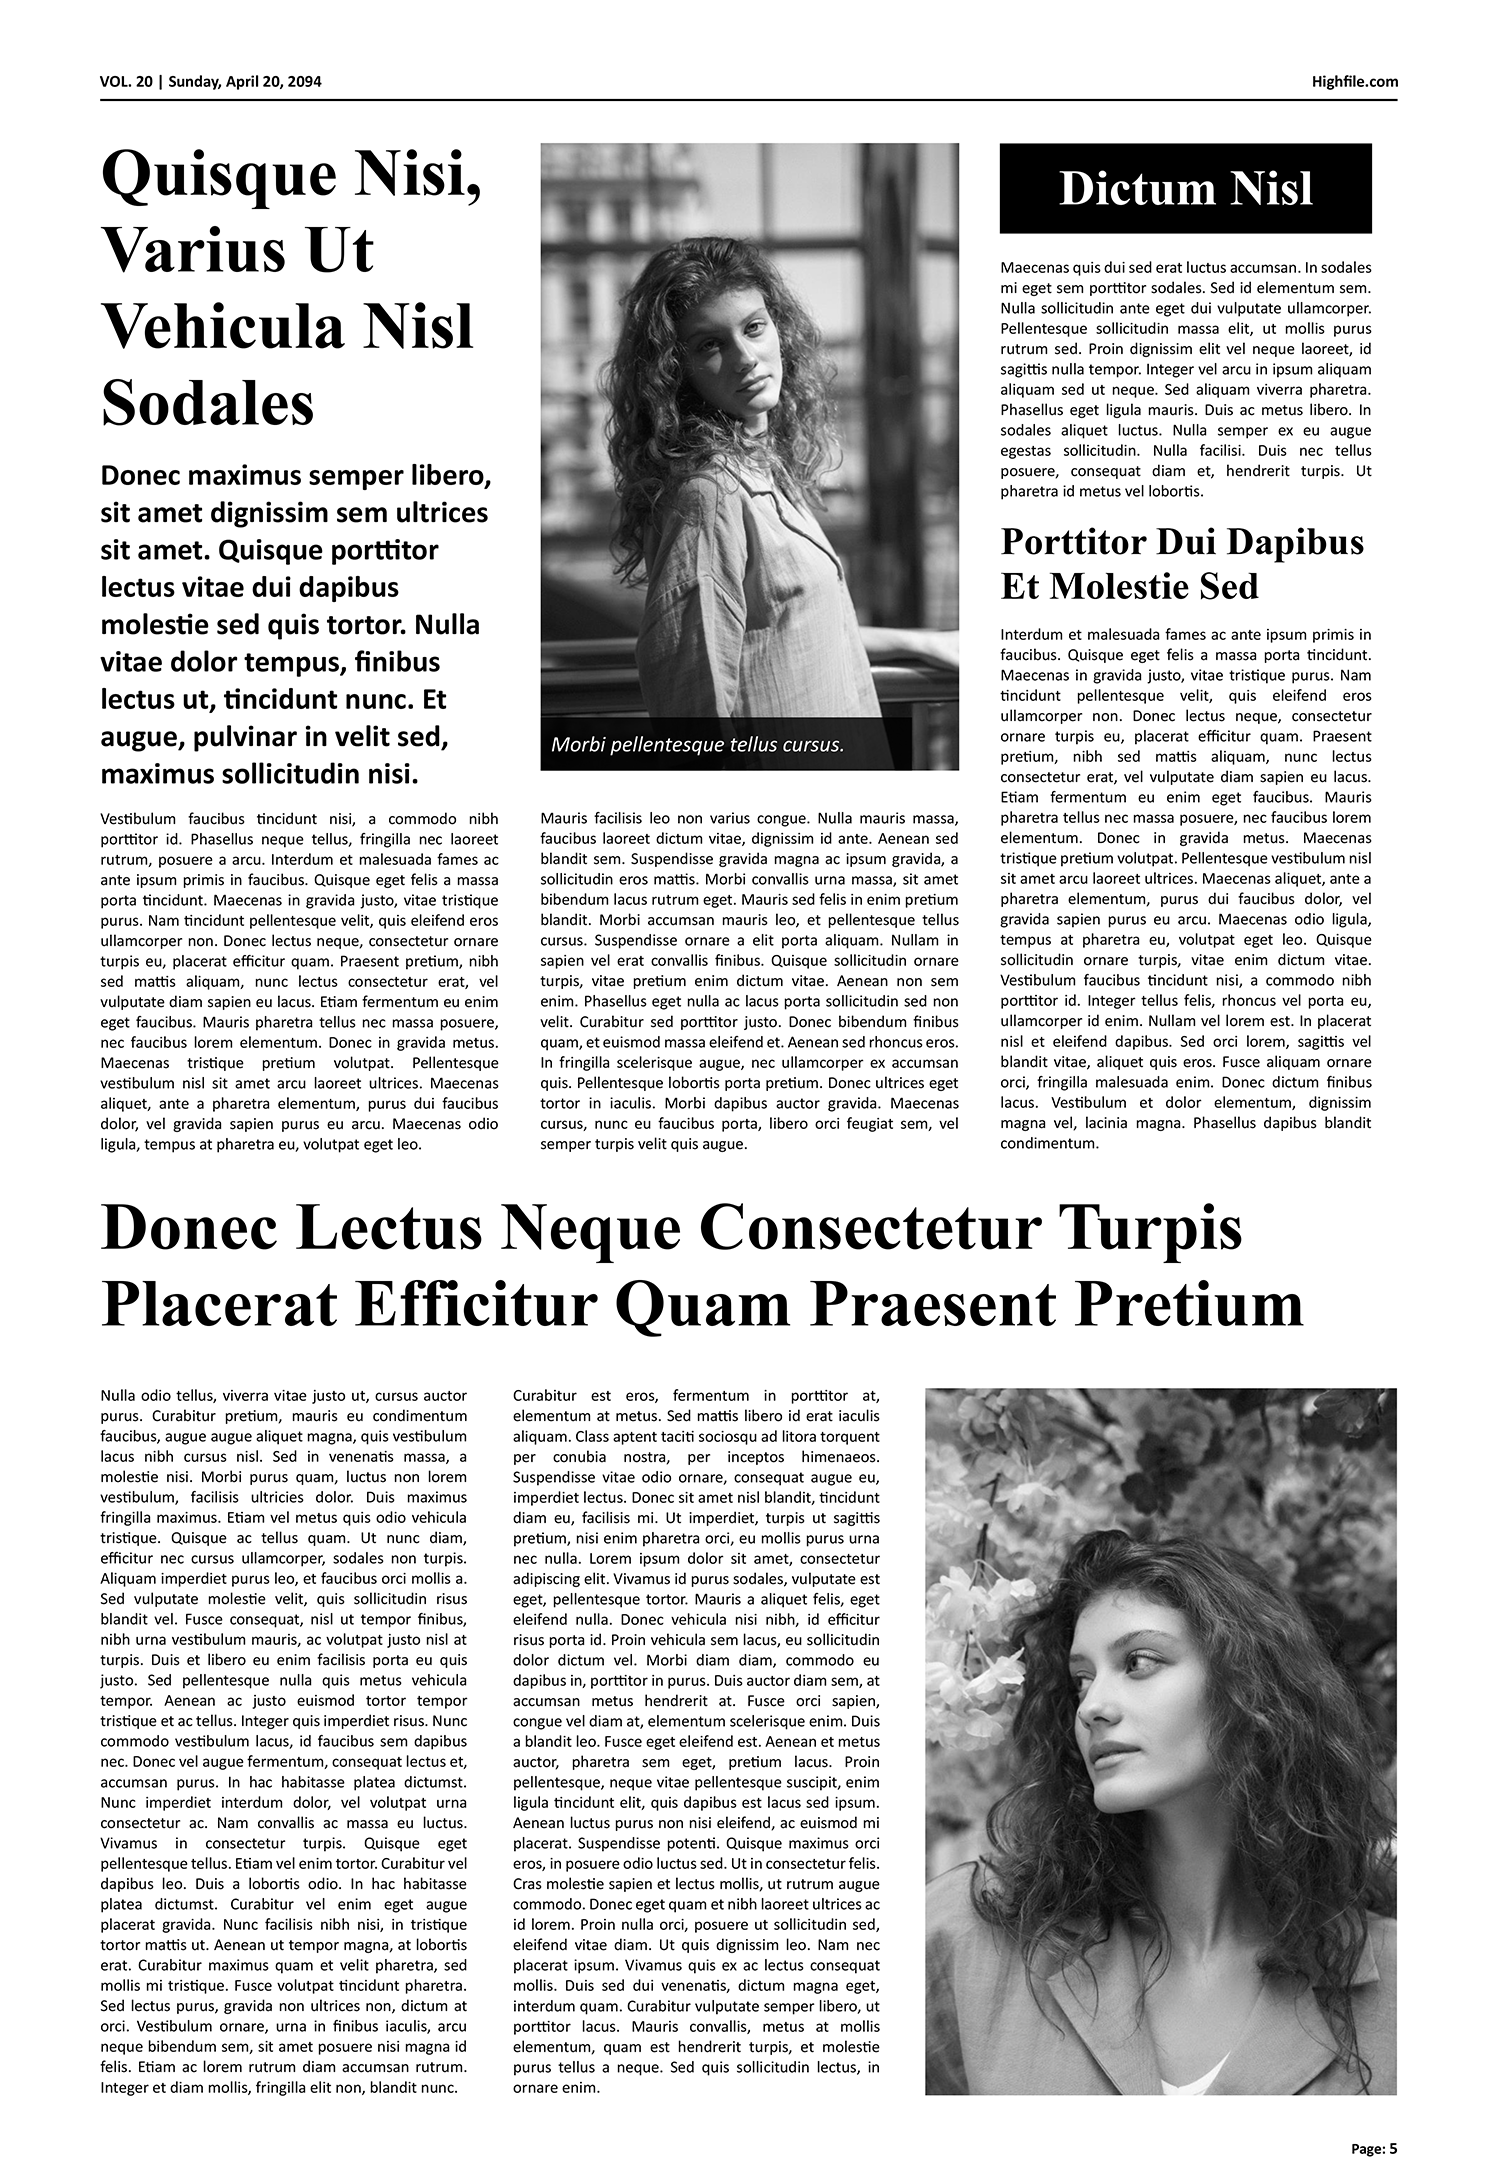 Newspaper Page Template - Page 05